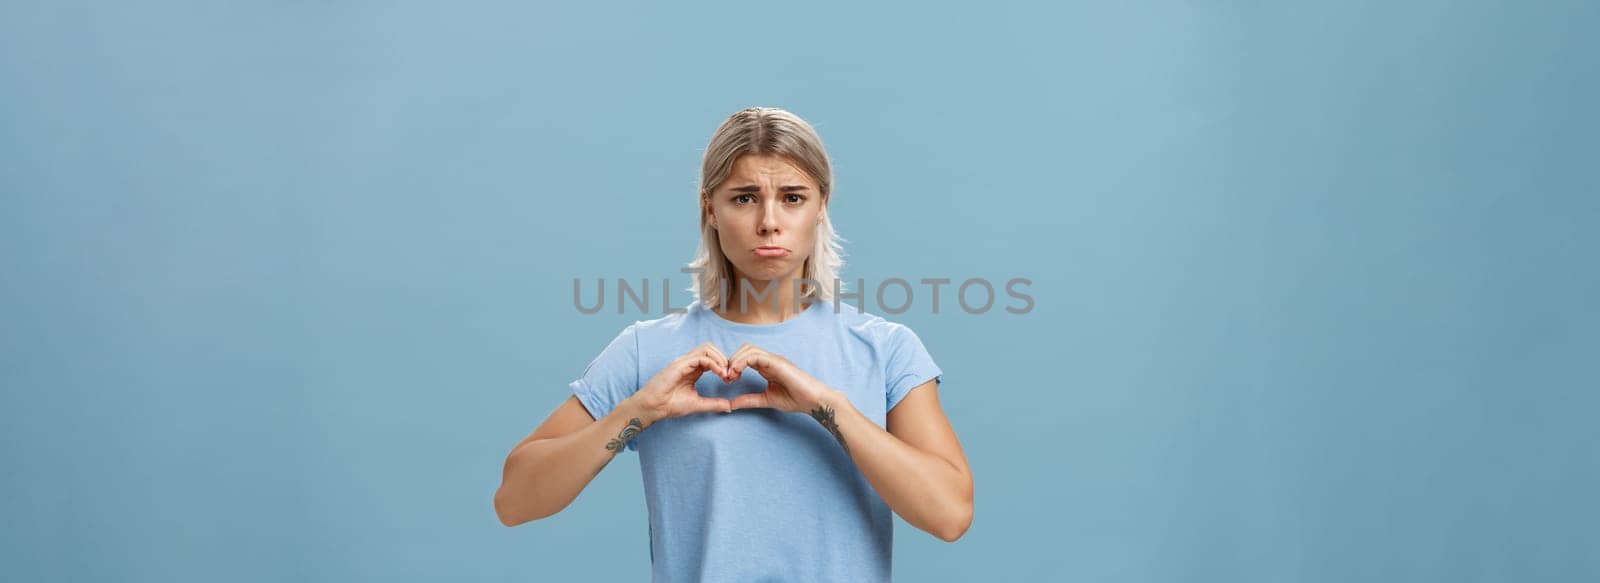 Heart being broken. Sad and gloomy heartbroken girl with blond hair tattoos on arms and tanned skin pursing lips whining and complaining making love sign over breast standing unhappy near blue wall by Benzoix